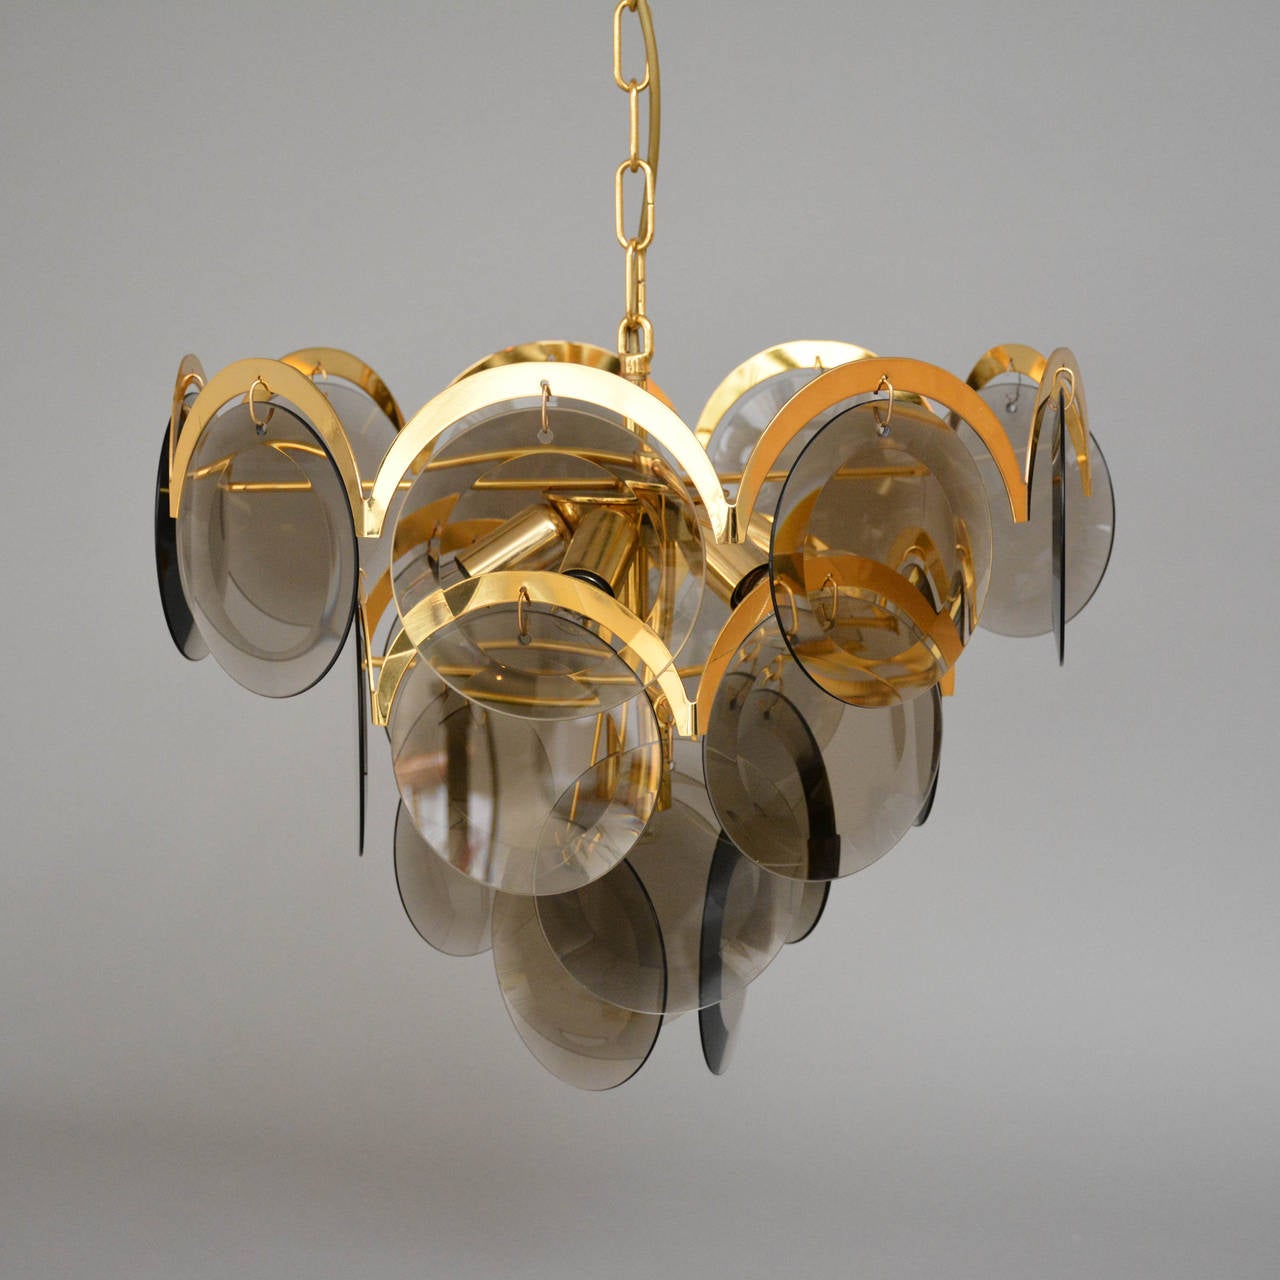 Ceiling lamp brass and facet cut smoked brown glass. 18 glass prisms. Seven points of light, Italy, 1960s-1970s.